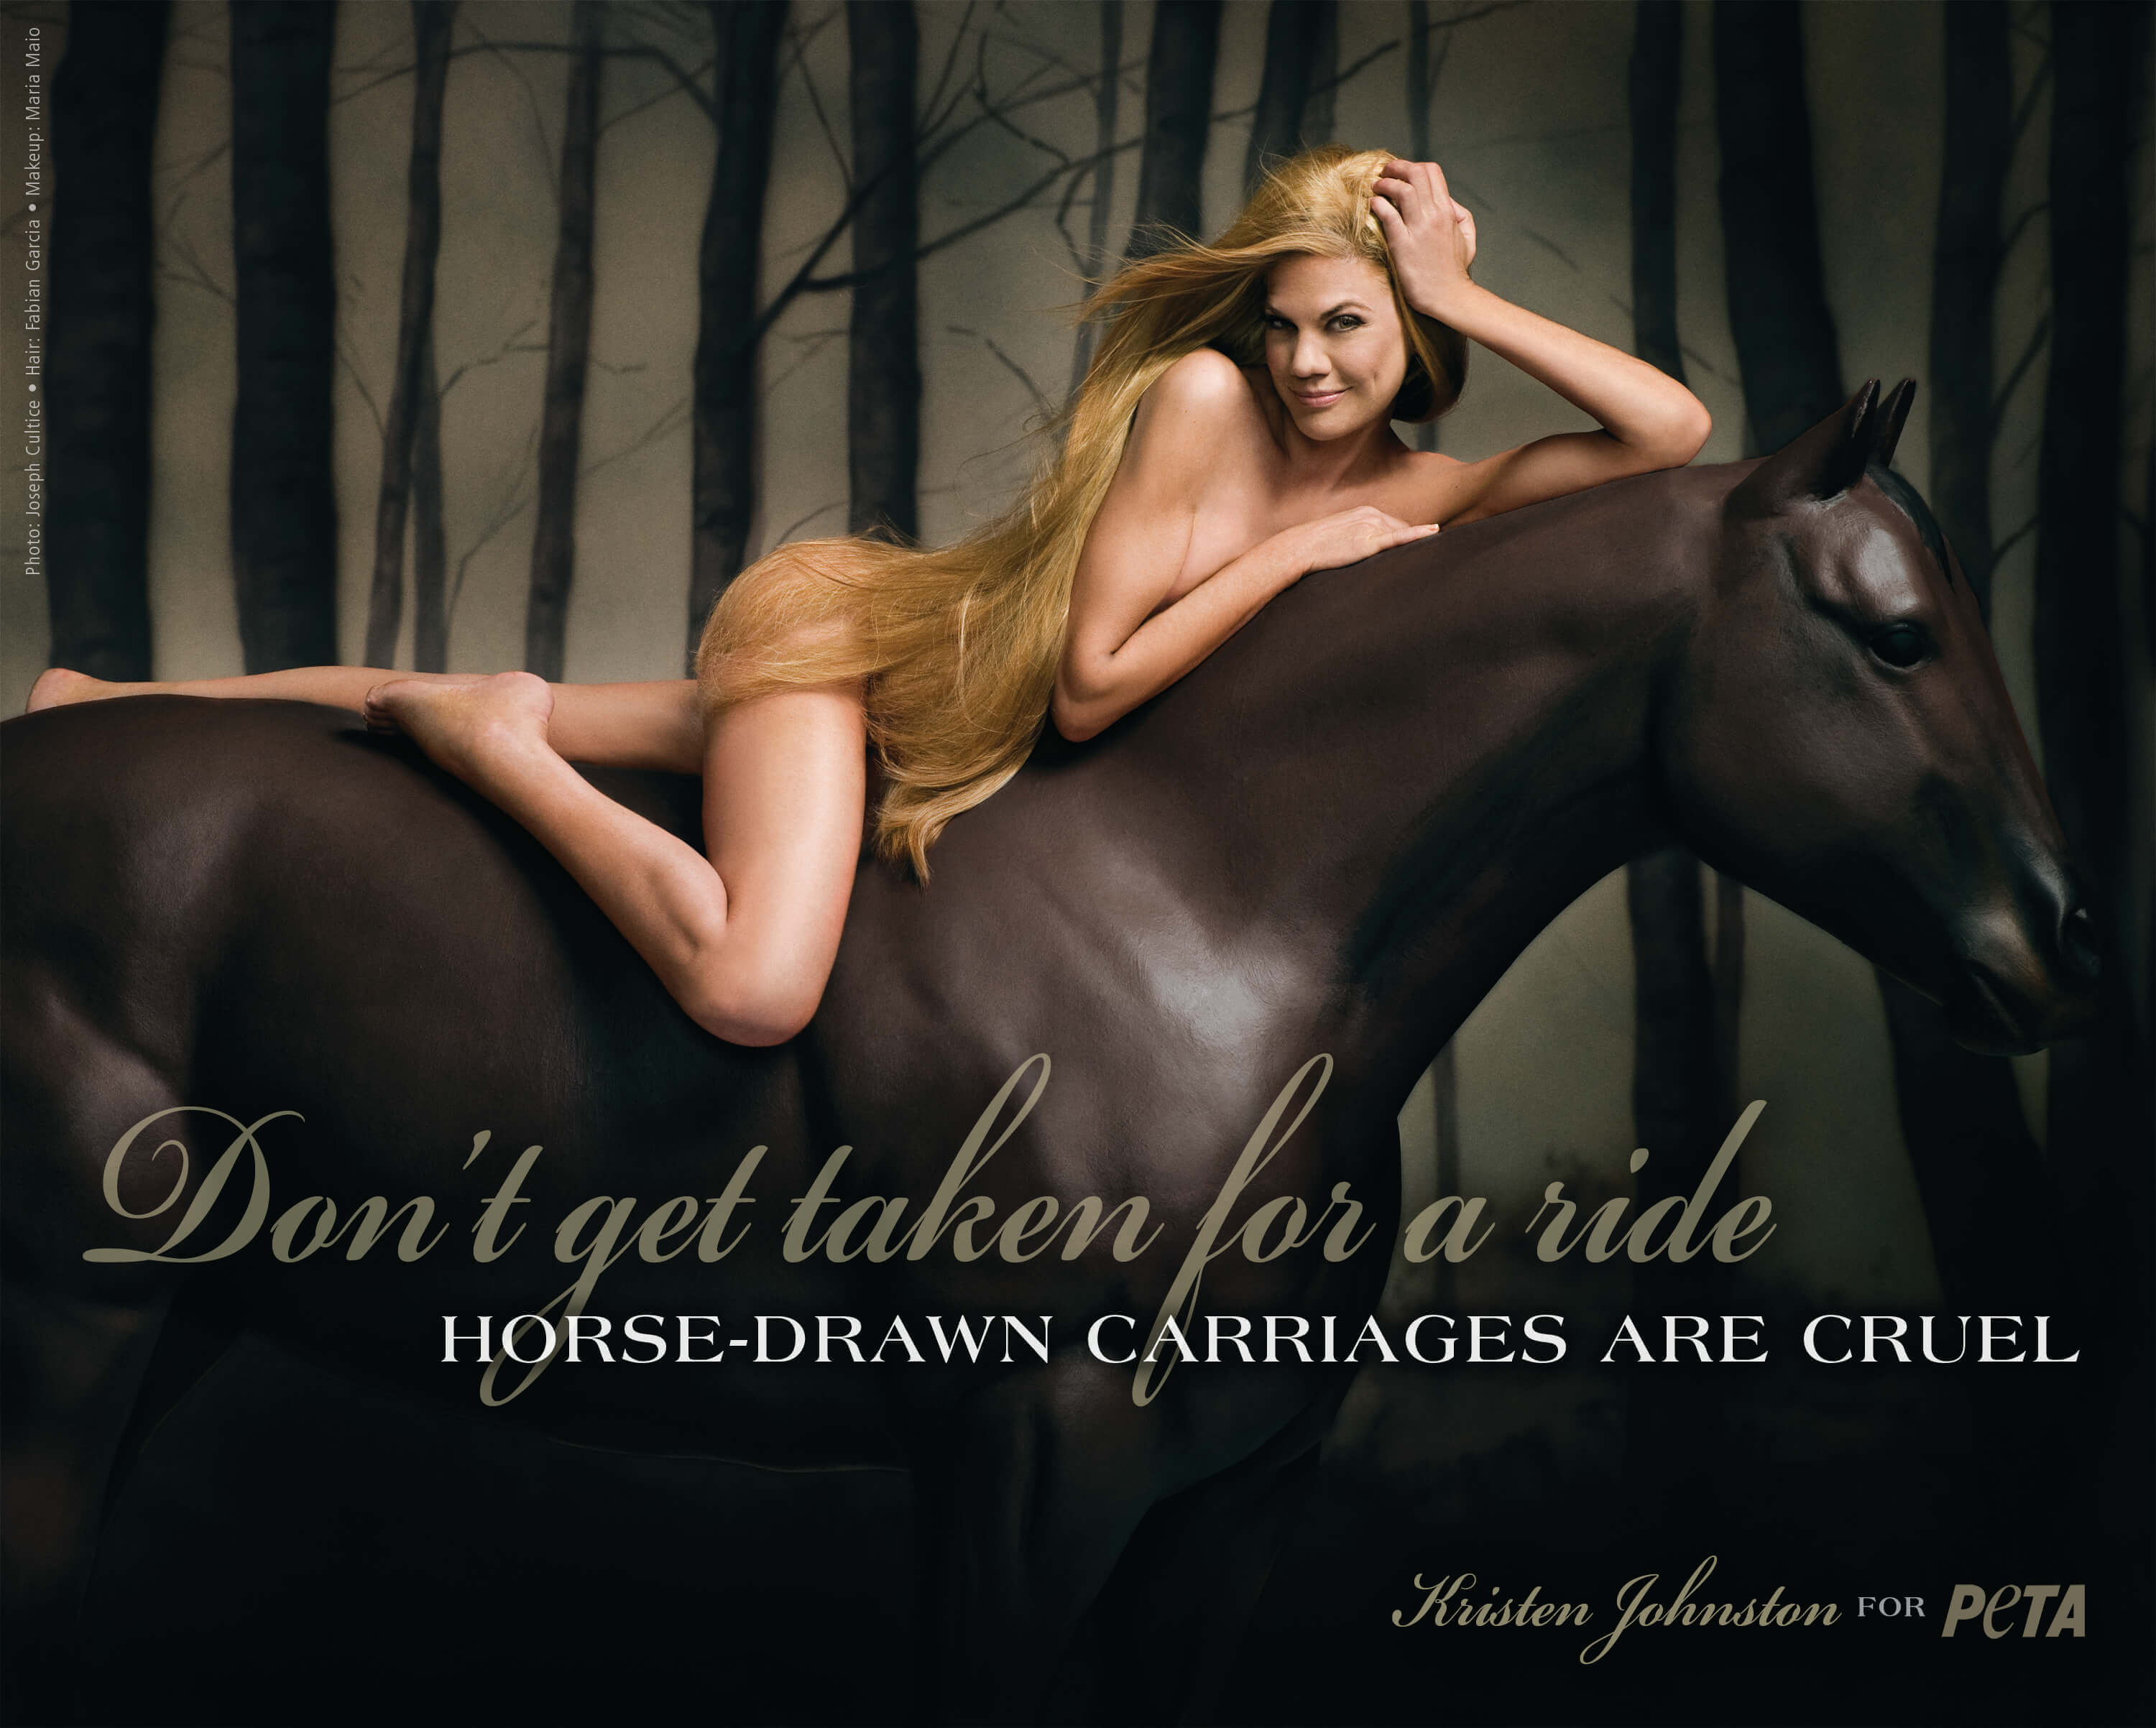 Kristen Johnston Poses Nude in Ad Against Horse-Drawn ...